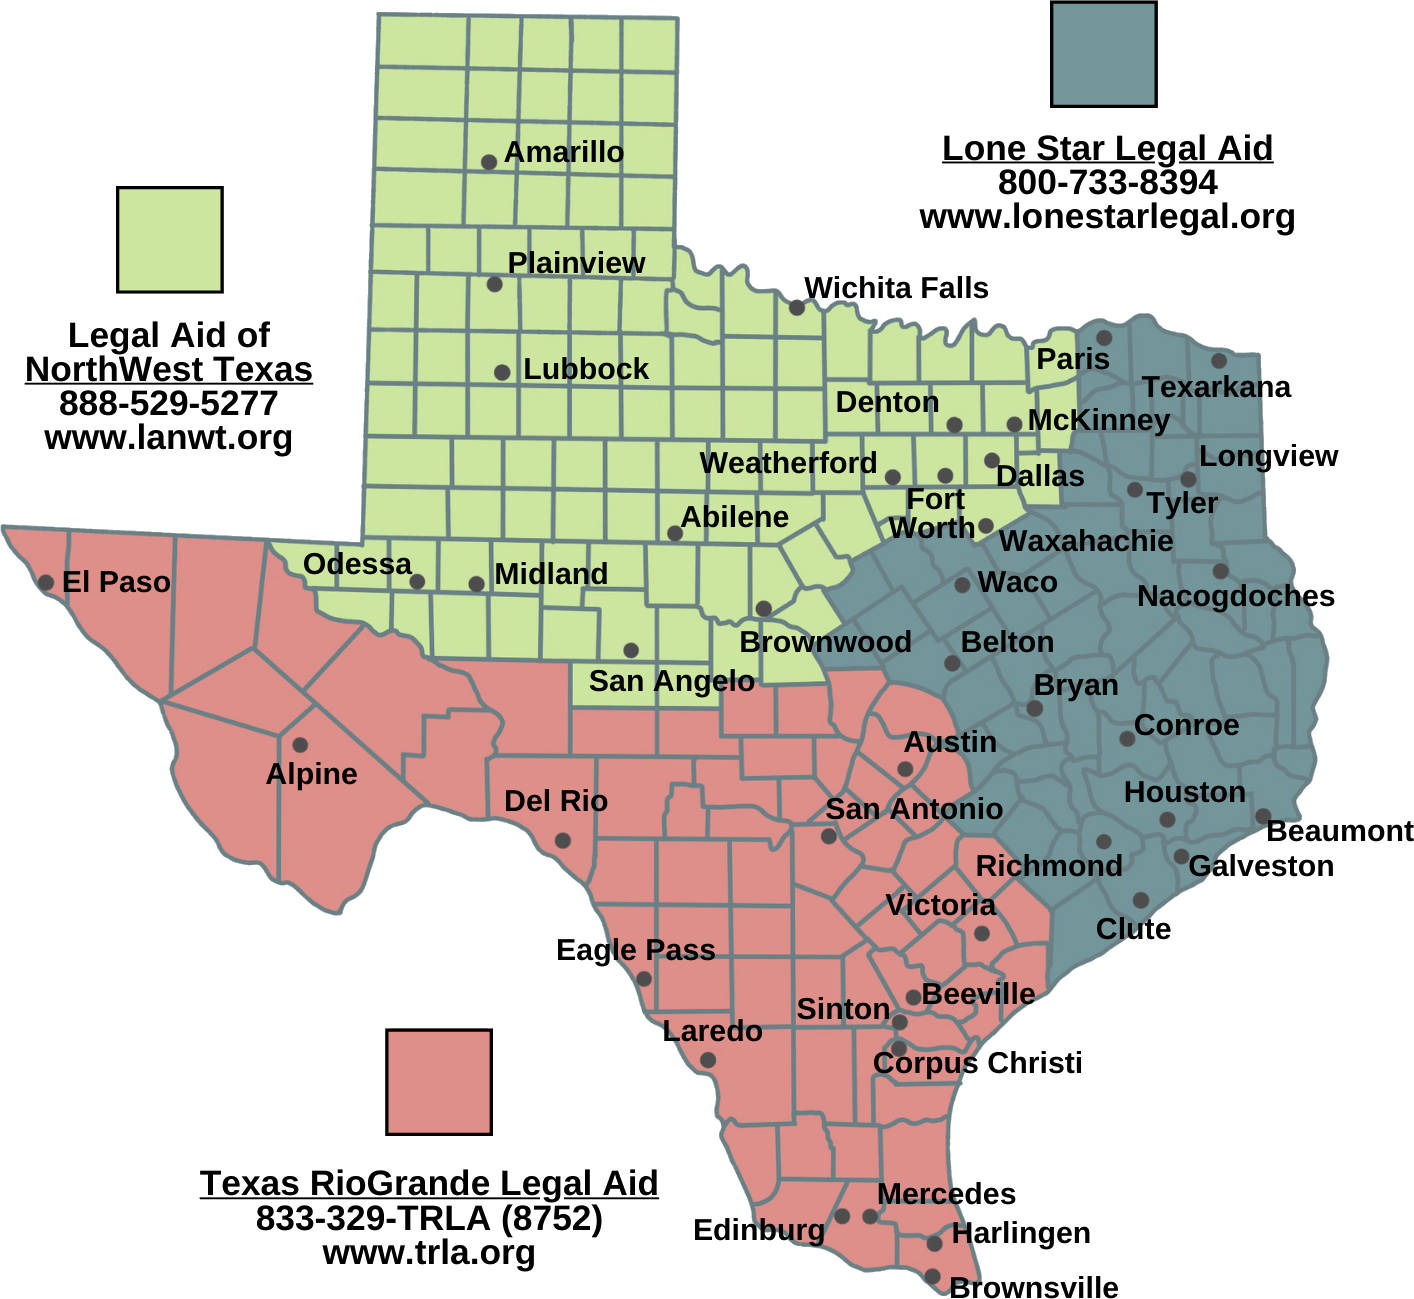 Texas map showing regions served by Legal Aid of NorthWest Texas, Texas RioGrande Legal Aid, and Lone Star Legal Aid programs